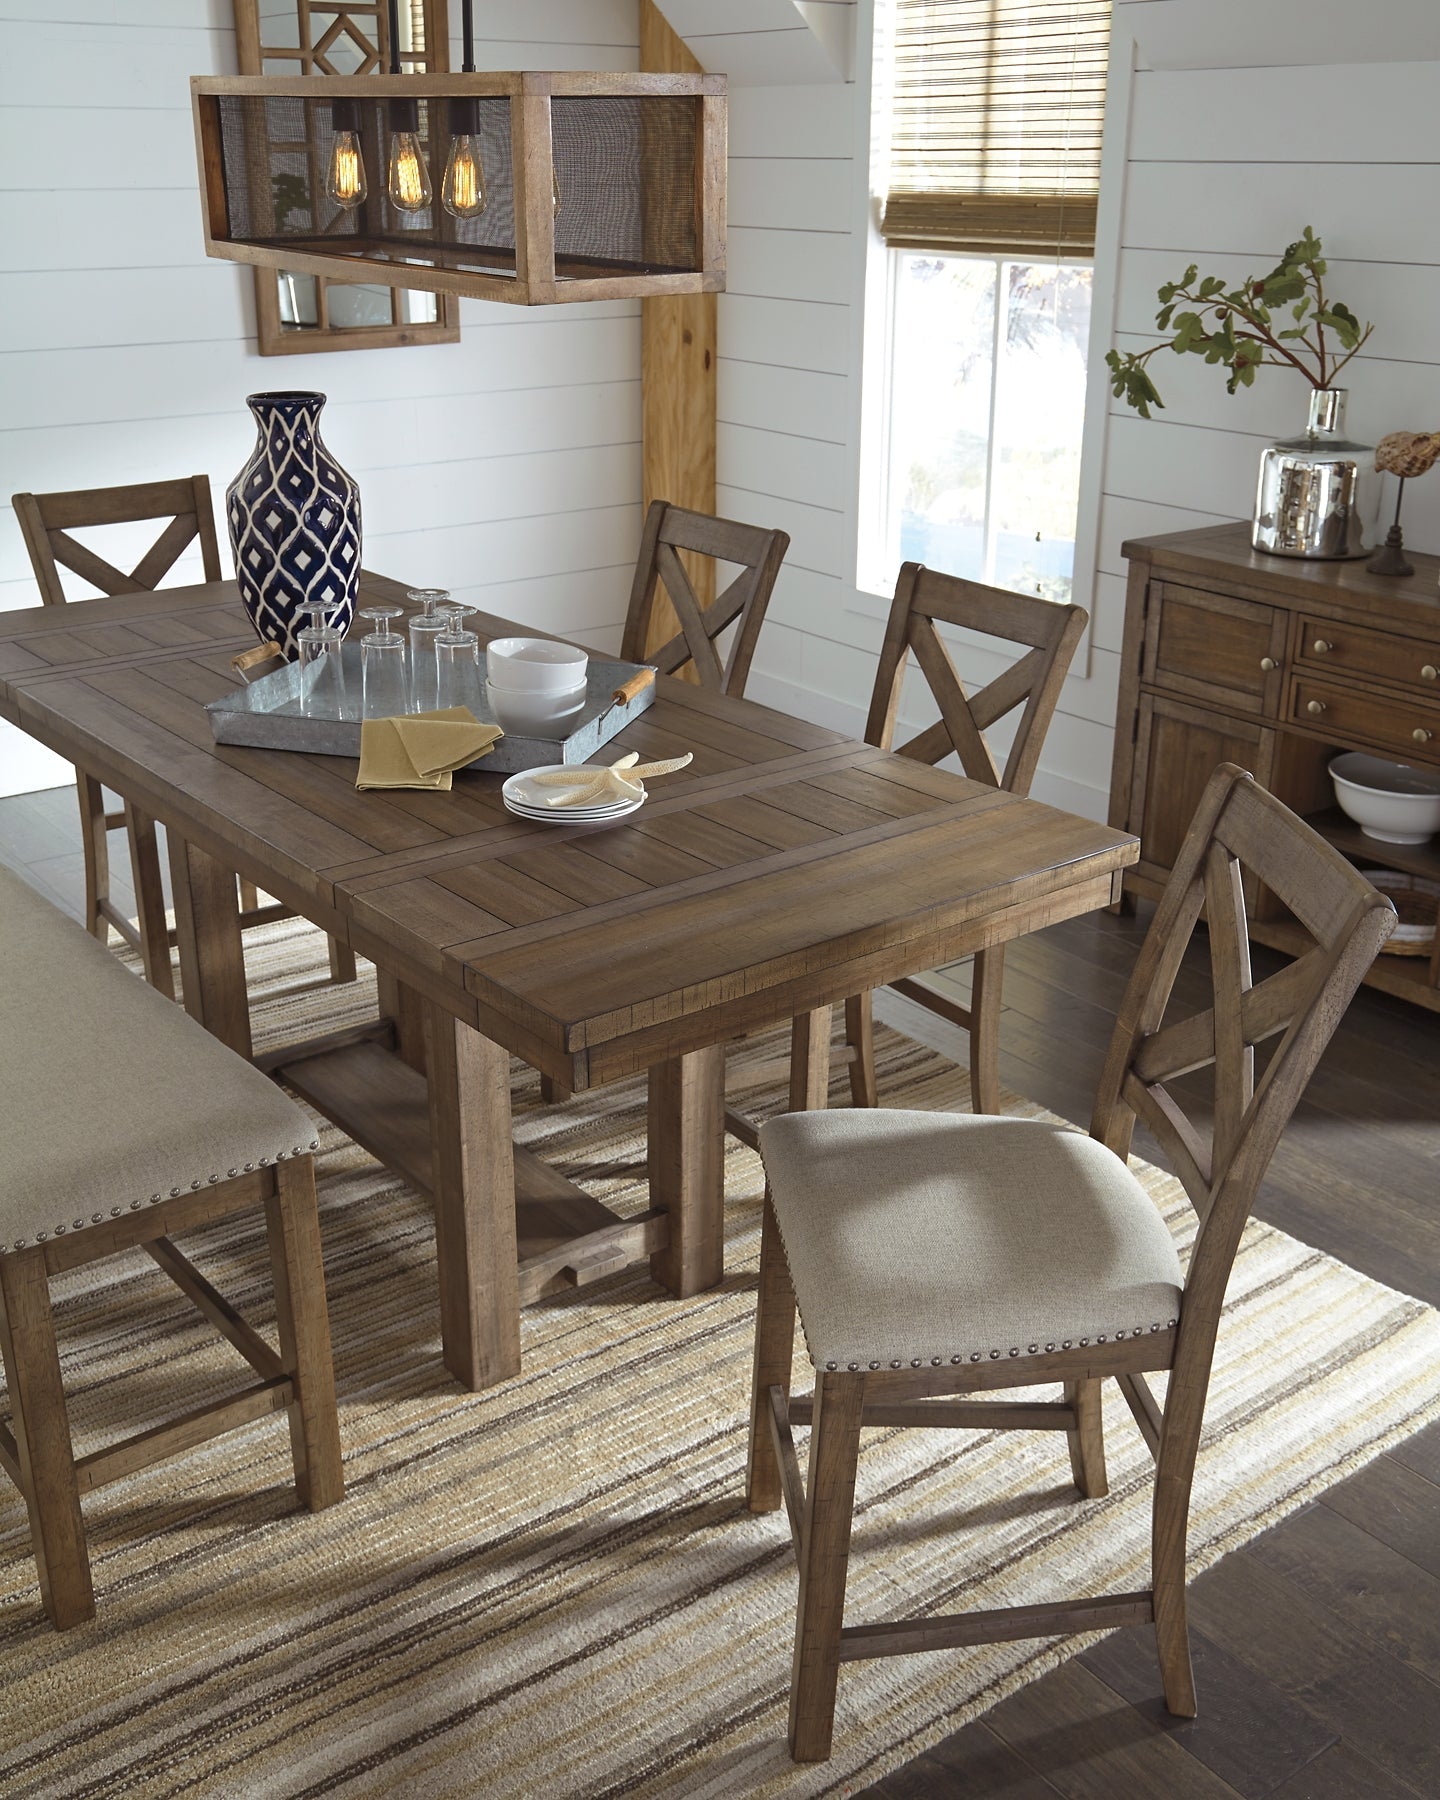 Moriville Counter Height Dining Table and 4 Barstools with Storage at Walker Mattress and Furniture Locations in Cedar Park and Belton TX.